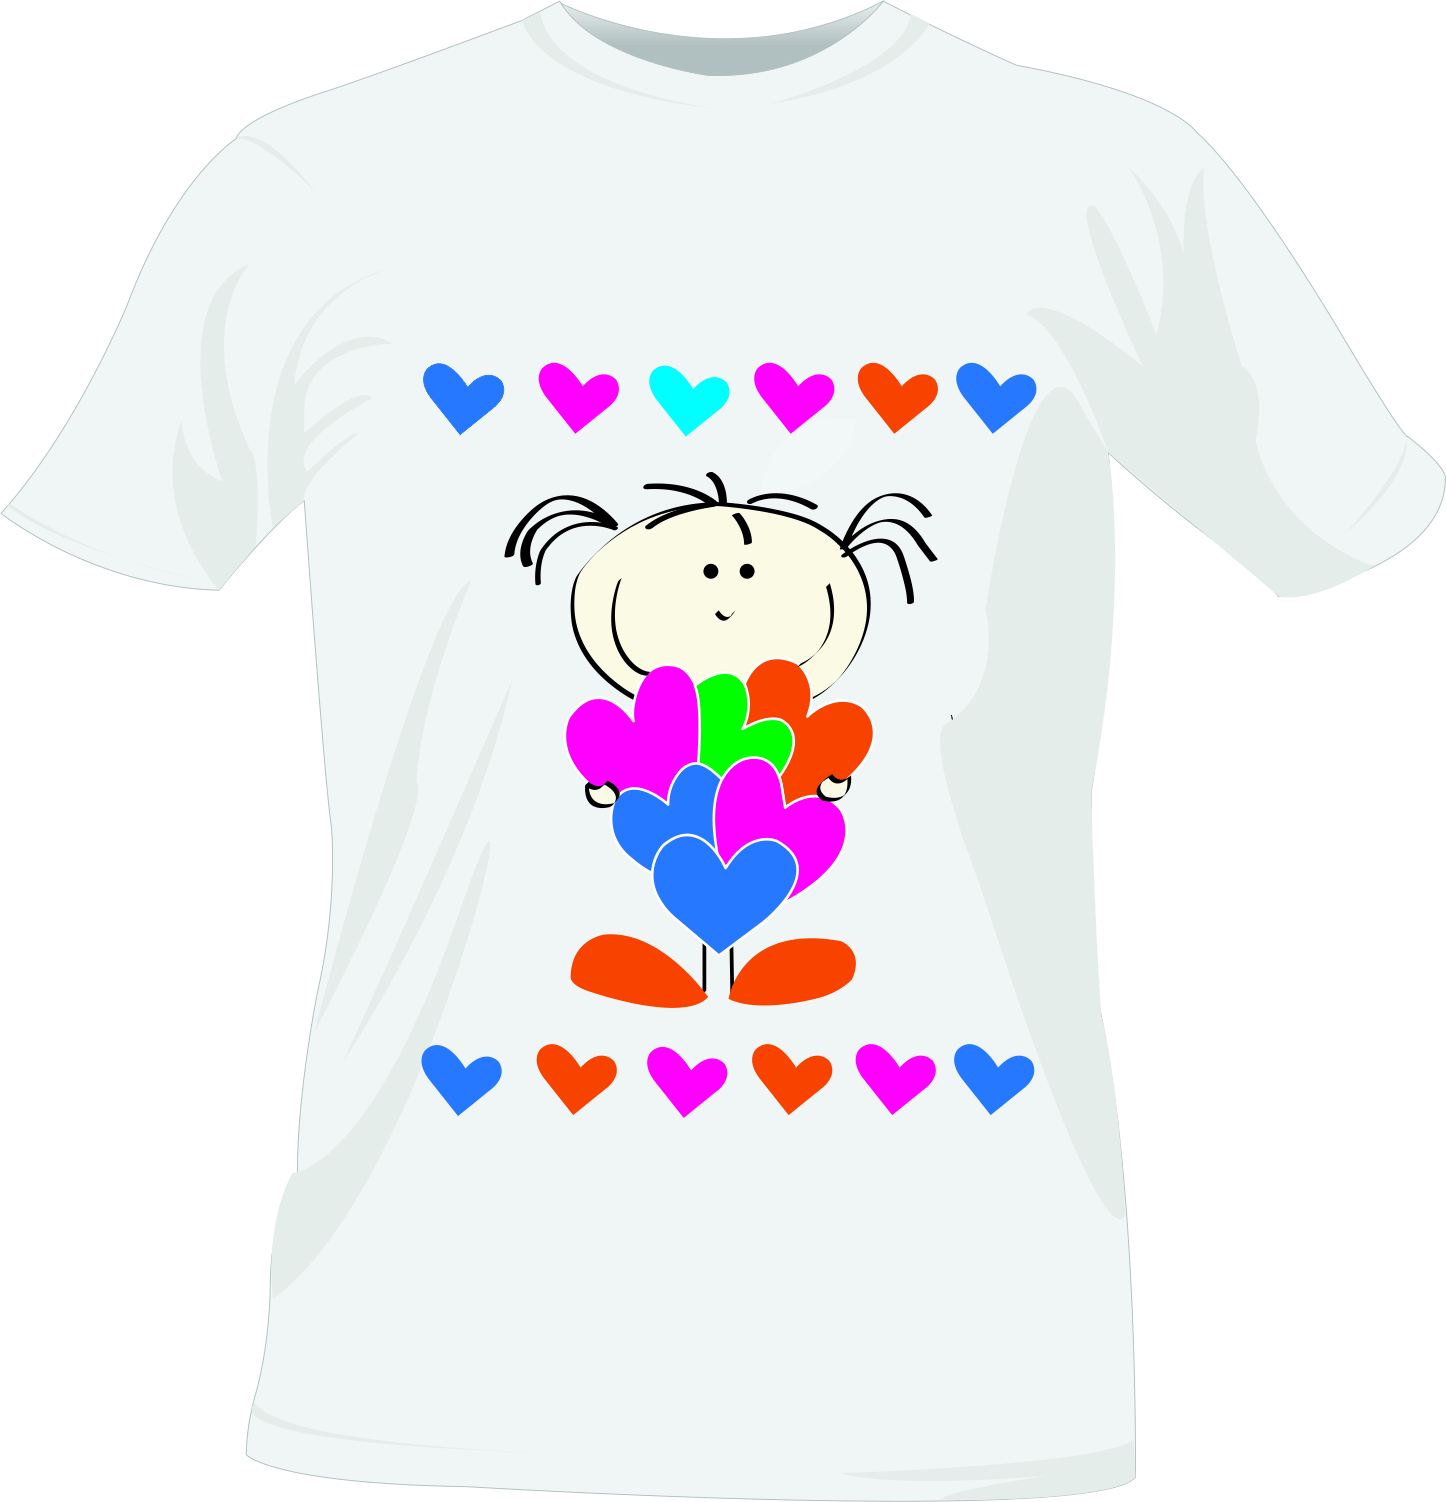 Colorful Hearts T Shirt Design PNG image